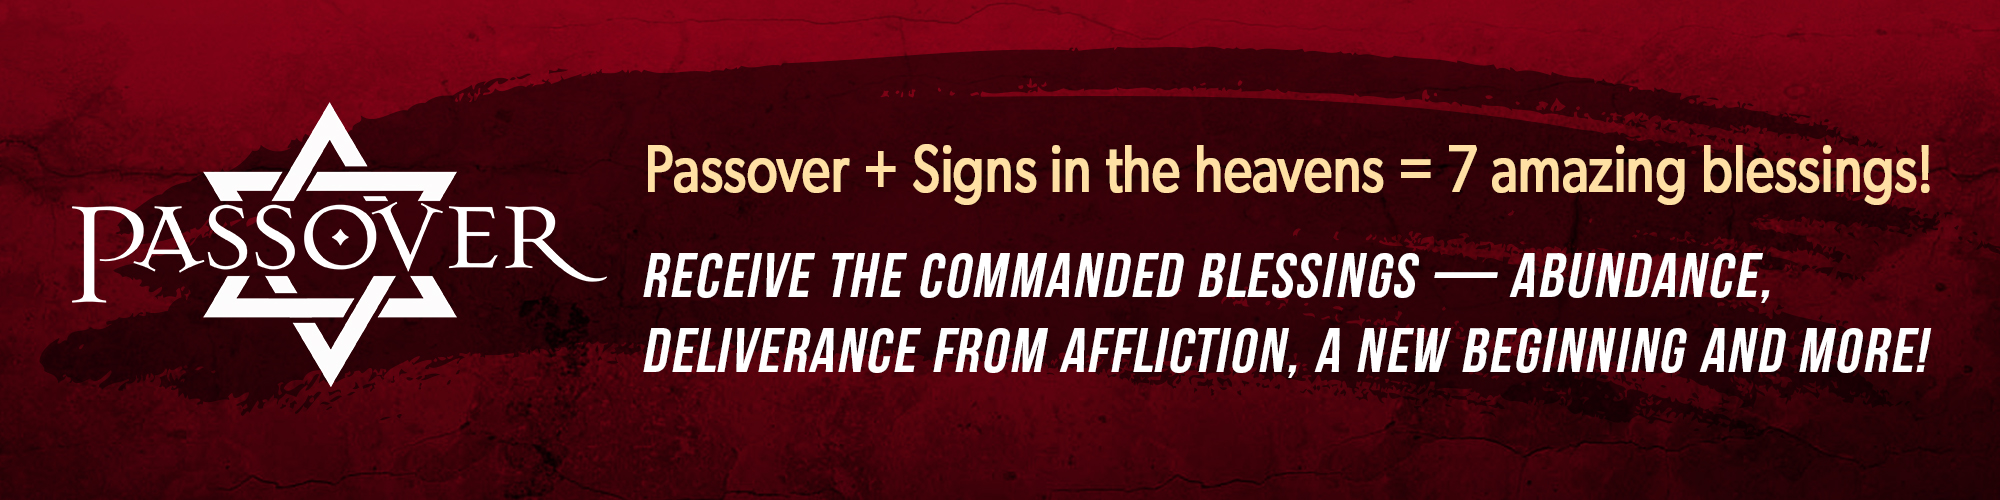 Passover + Signs in the Heavens = 7 Amazing Blessings! Receive the Commanded Blessings - Abundance, Deliverance from Affliction, A New Beginning and More!